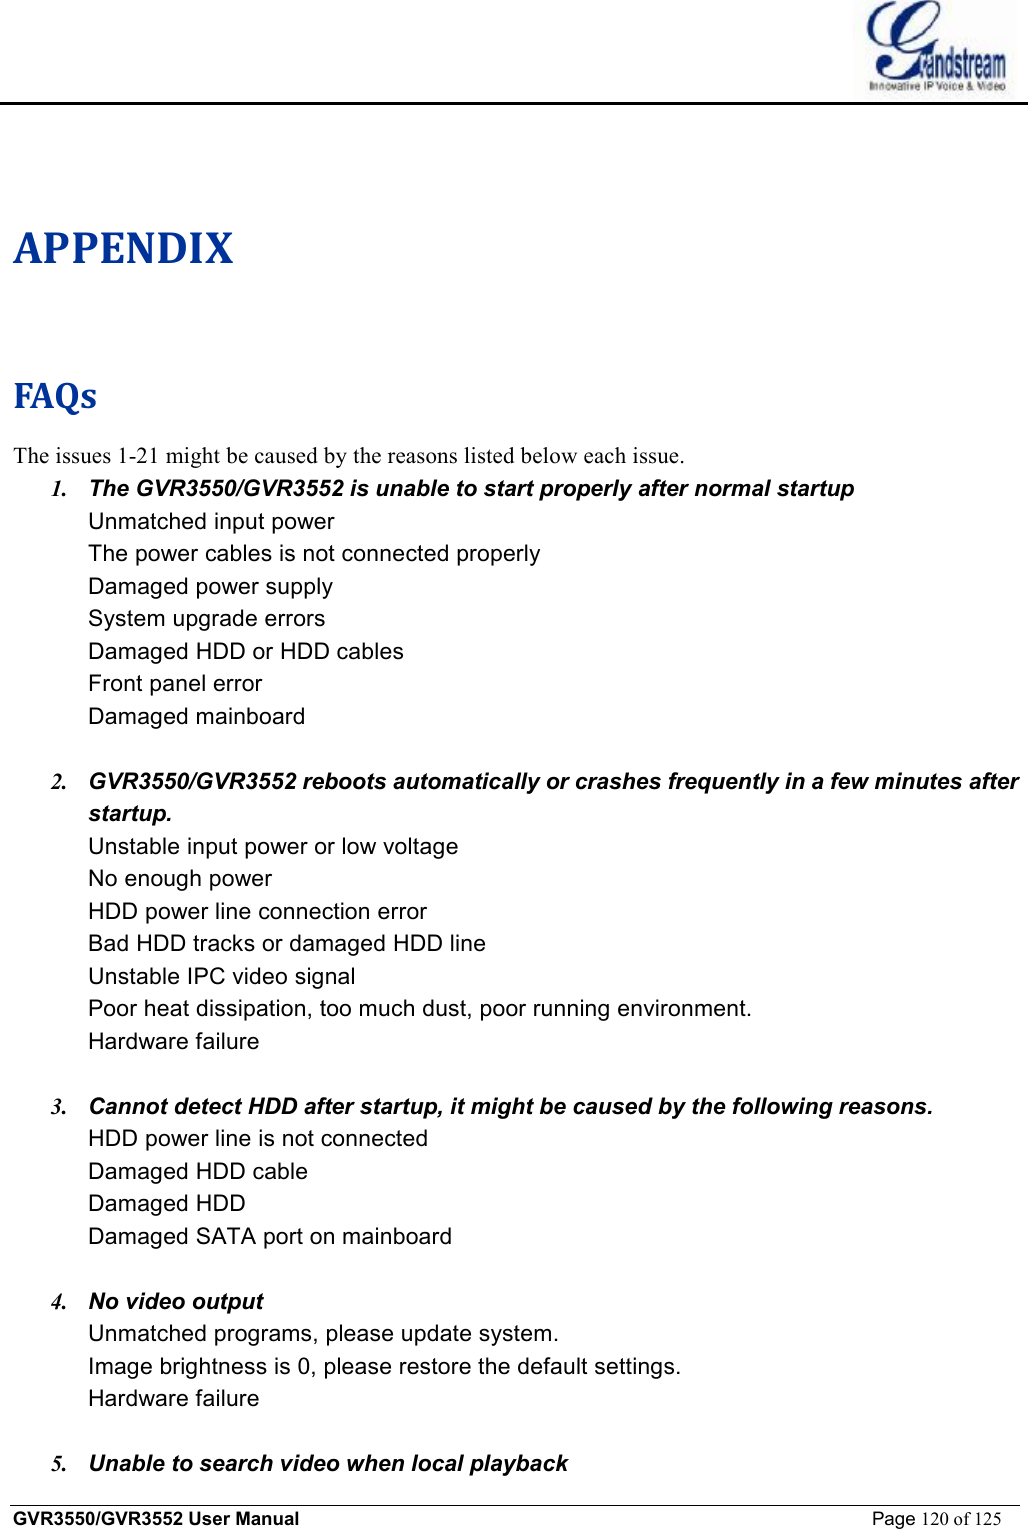    GVR3550/GVR3552 User Manual                                                             Page 120 of 125        APPENDIX FAQs The issues 1-21 might be caused by the reasons listed below each issue. 1. The GVR3550/GVR3552 is unable to start properly after normal startup Unmatched input power The power cables is not connected properly Damaged power supply System upgrade errors Damaged HDD or HDD cables Front panel error Damaged mainboard  2. GVR3550/GVR3552 reboots automatically or crashes frequently in a few minutes after startup. Unstable input power or low voltage No enough power HDD power line connection error Bad HDD tracks or damaged HDD line Unstable IPC video signal Poor heat dissipation, too much dust, poor running environment. Hardware failure  3. Cannot detect HDD after startup, it might be caused by the following reasons. HDD power line is not connected Damaged HDD cable Damaged HDD Damaged SATA port on mainboard  4. No video output Unmatched programs, please update system. Image brightness is 0, please restore the default settings. Hardware failure  5. Unable to search video when local playback 